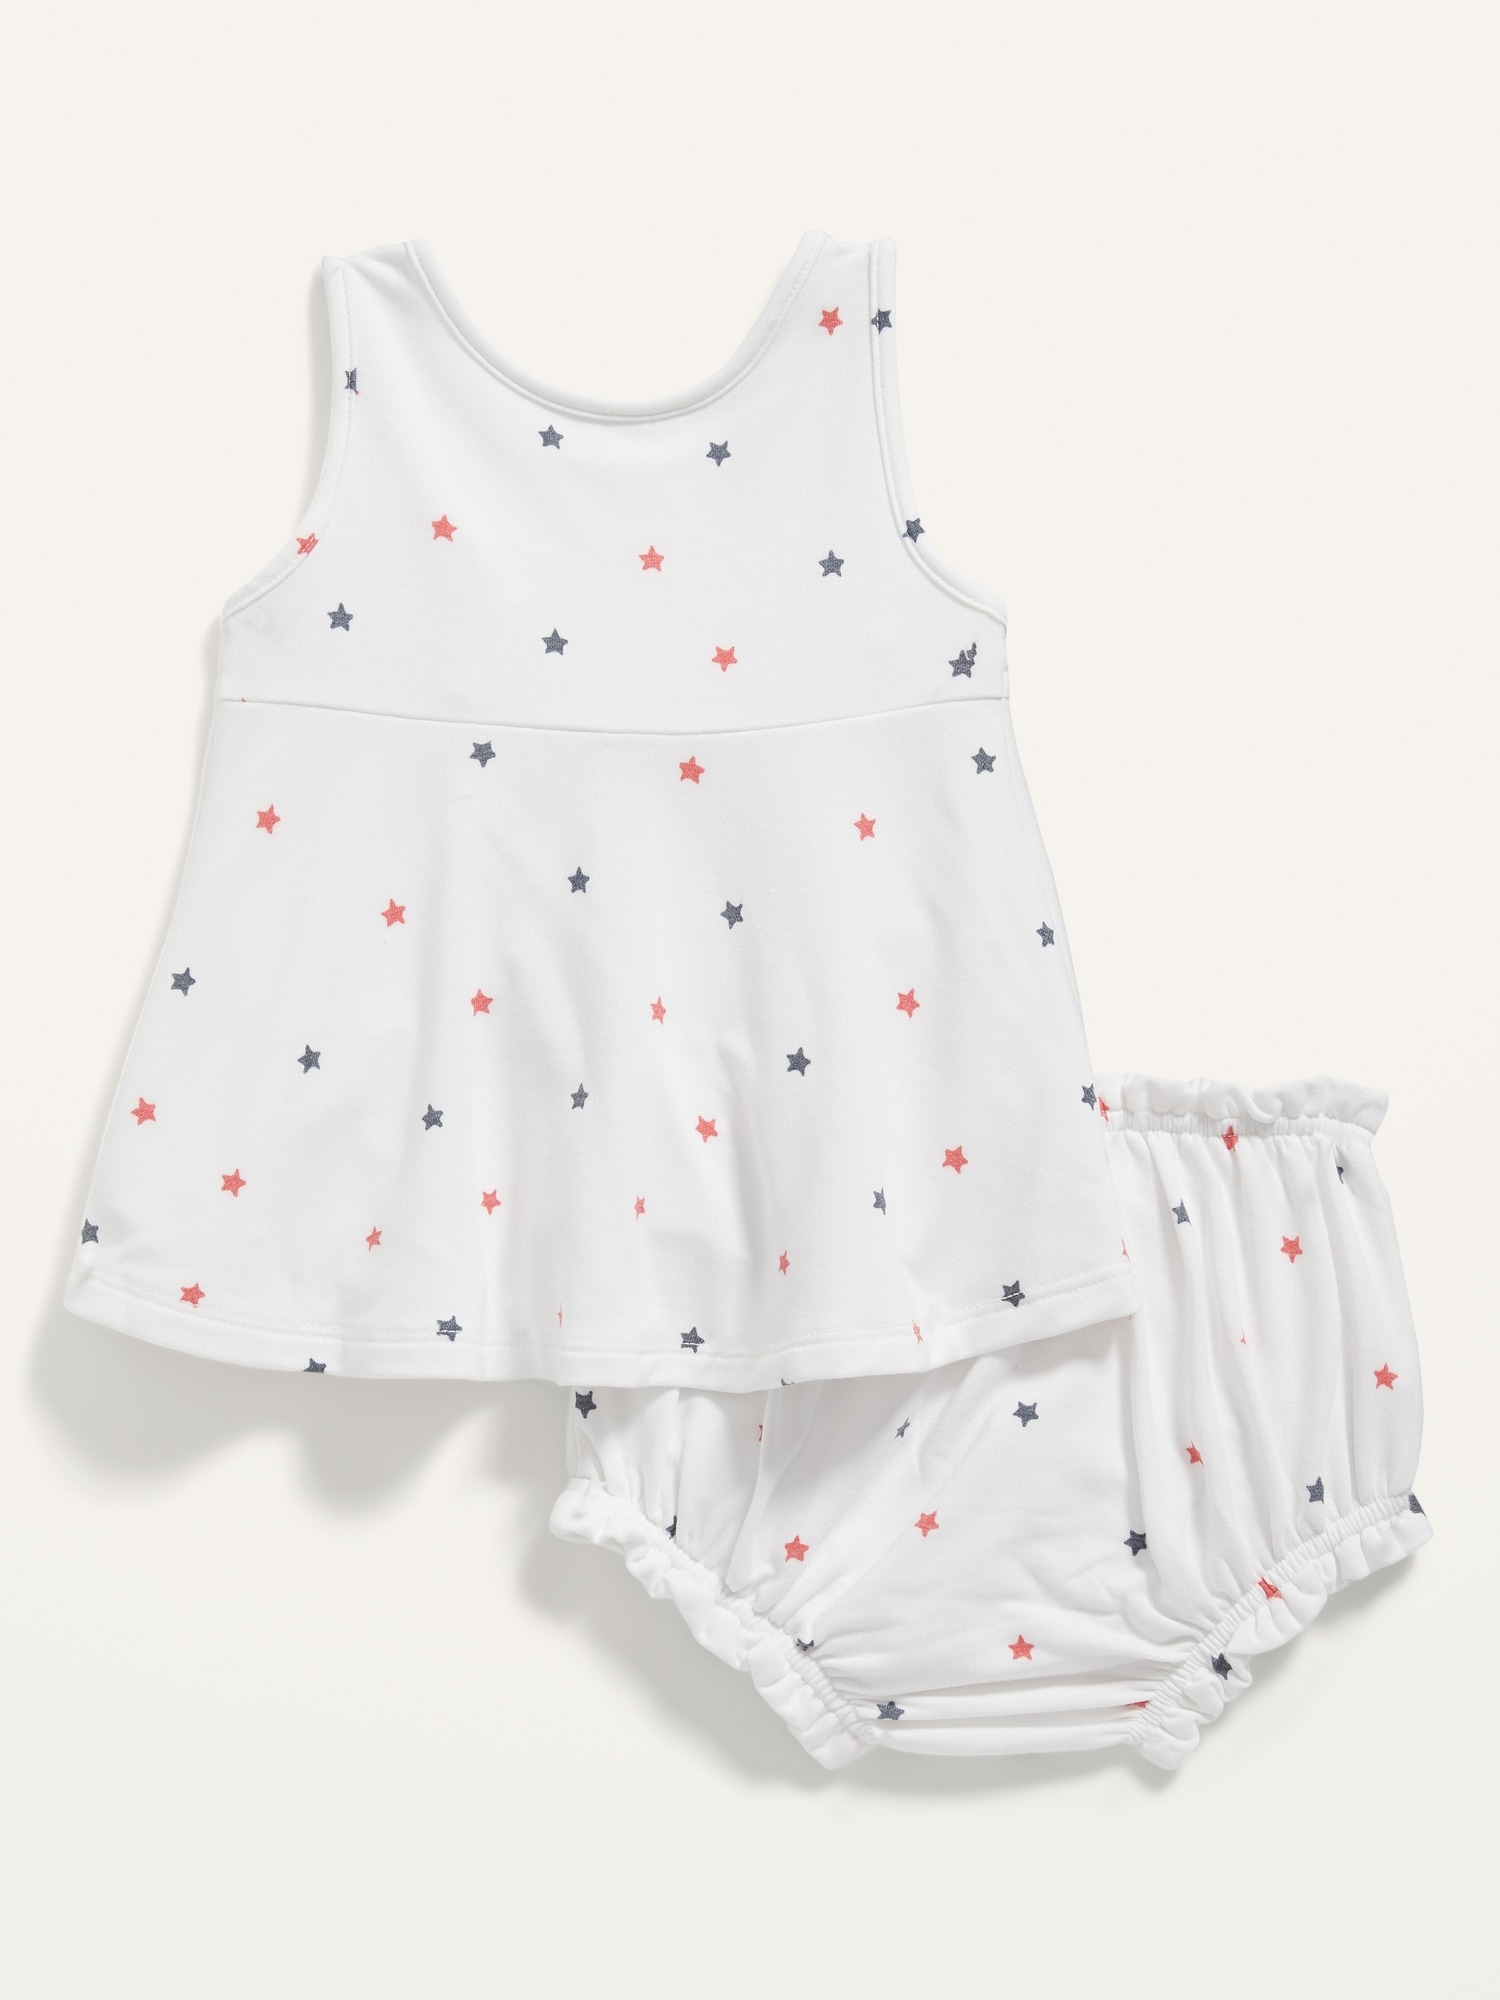 Americana Sleeveless Peplum Top and Bloomers Set for Baby | Old Navy